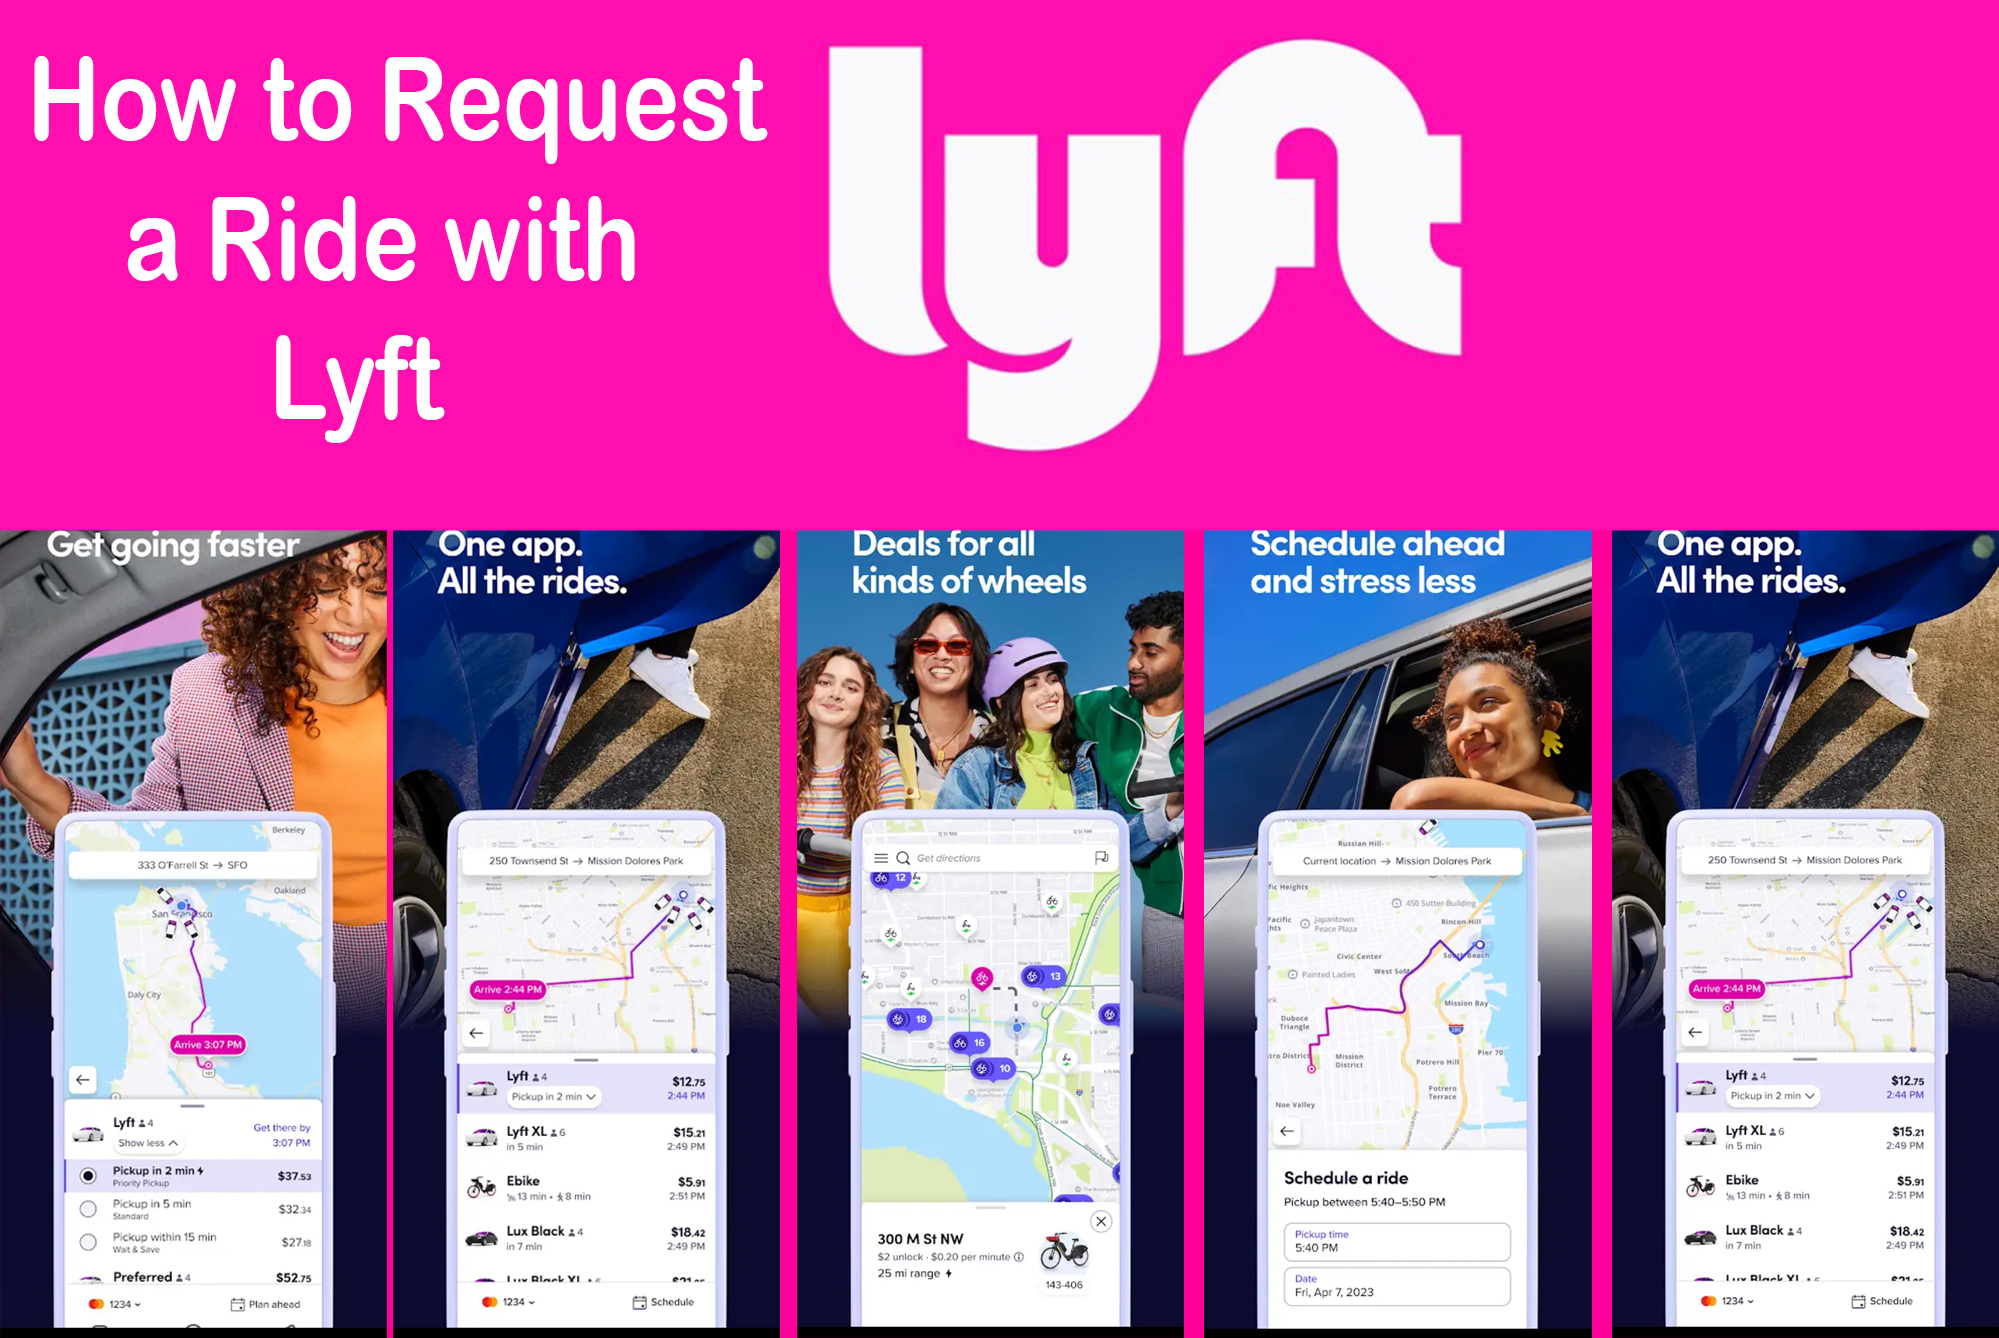 How to Request a Ride with Lyft